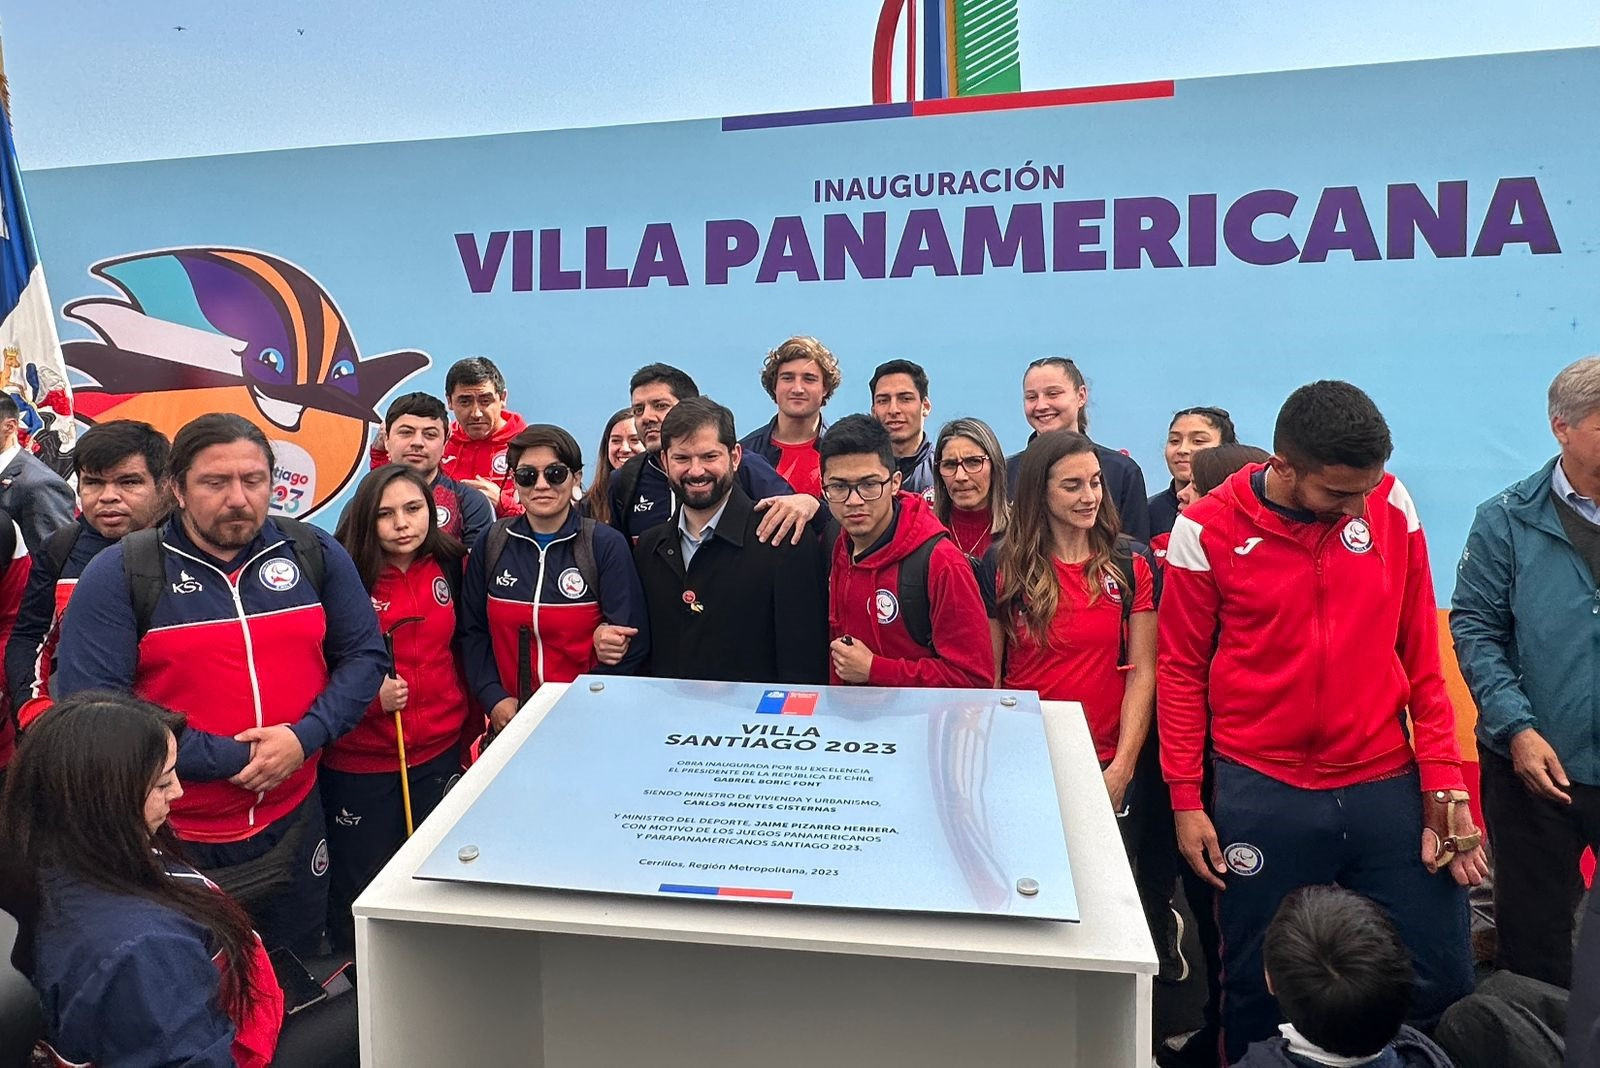 Chilean President officially inaugurates Pan American Village for Santiago 2023